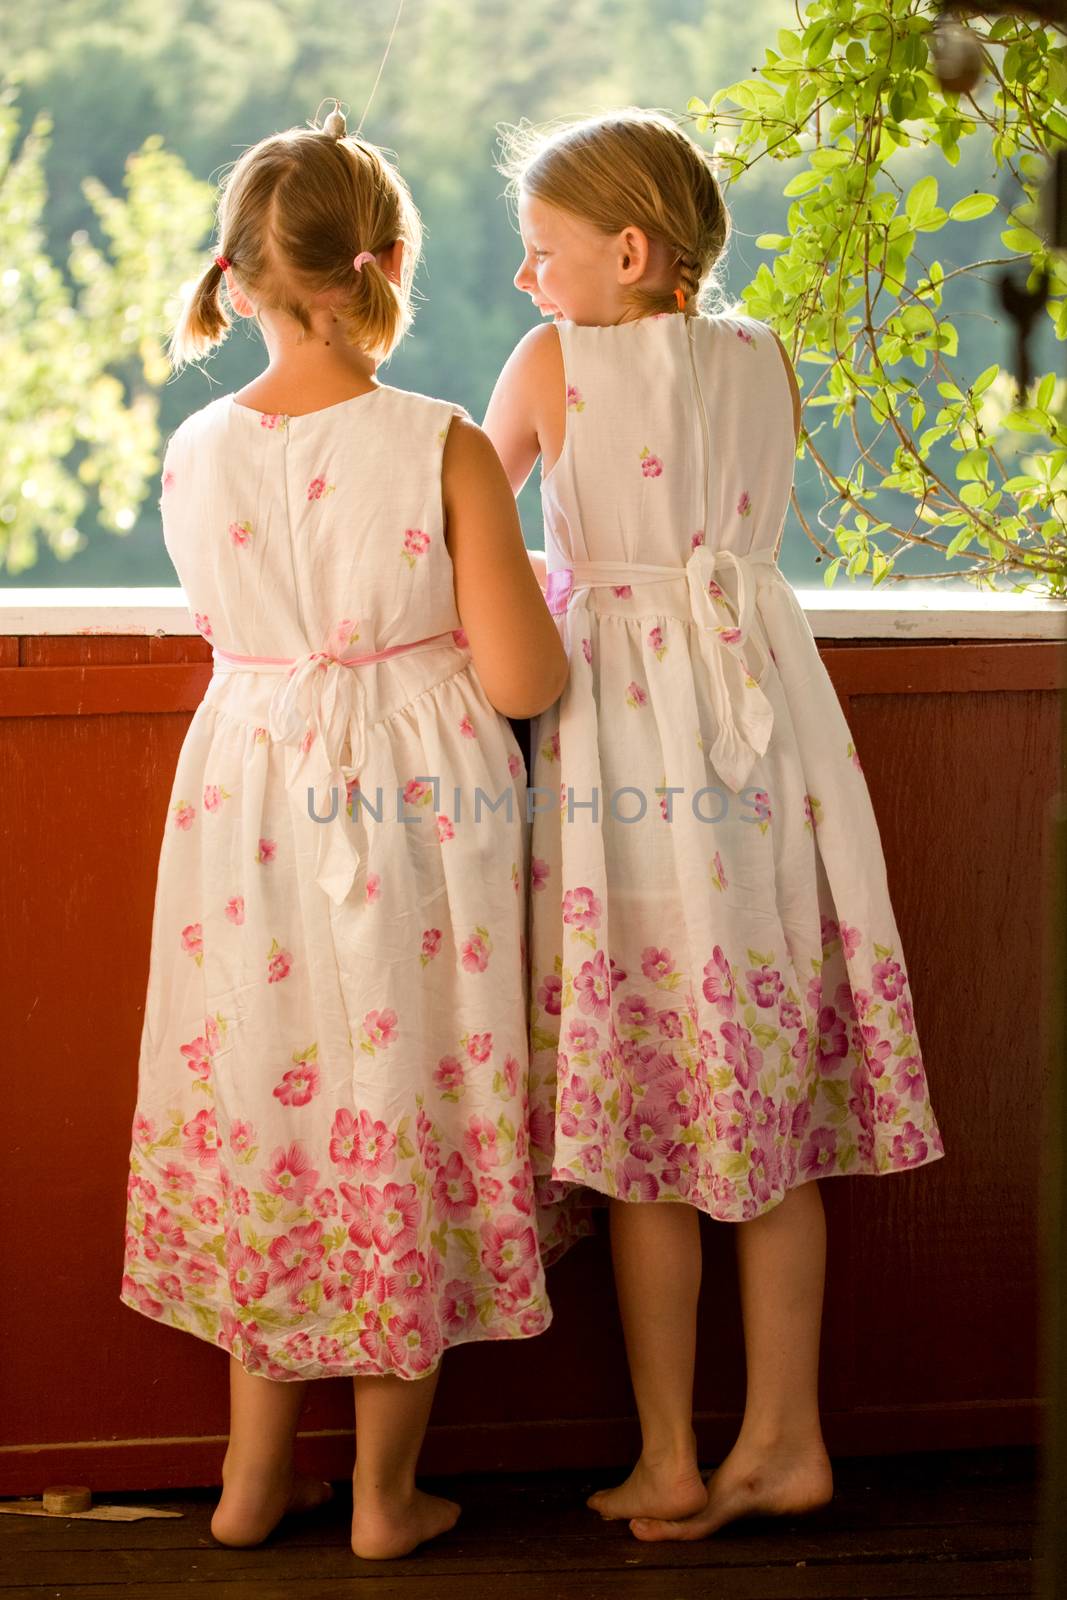 Twin girls in summer dresses on porch laughing